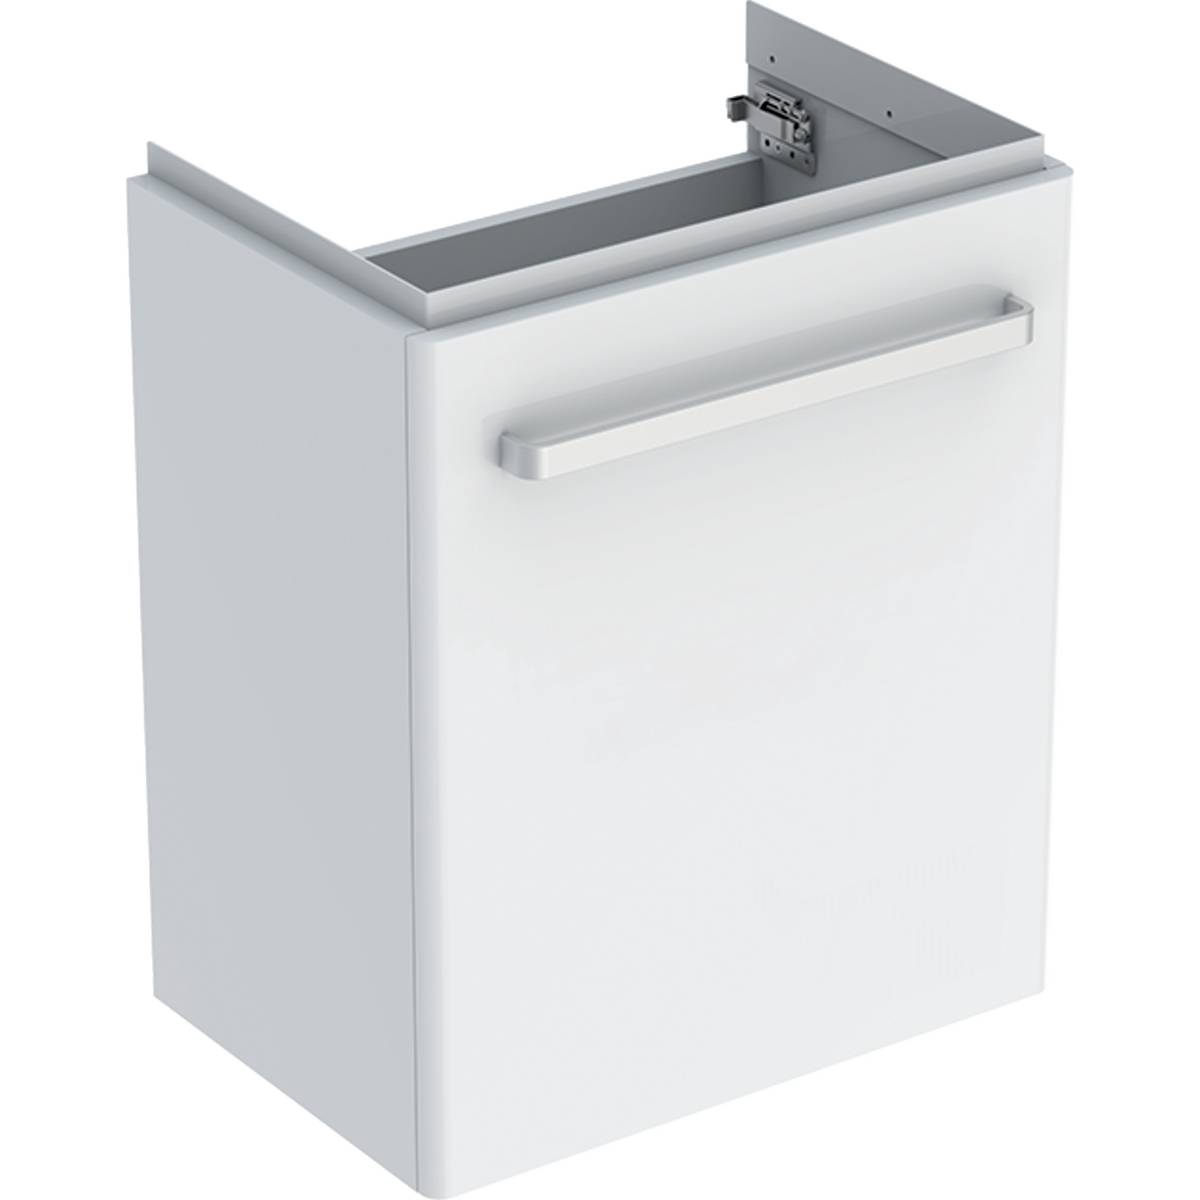 Selnova Compact cabinet for washbasin, with one door and service space